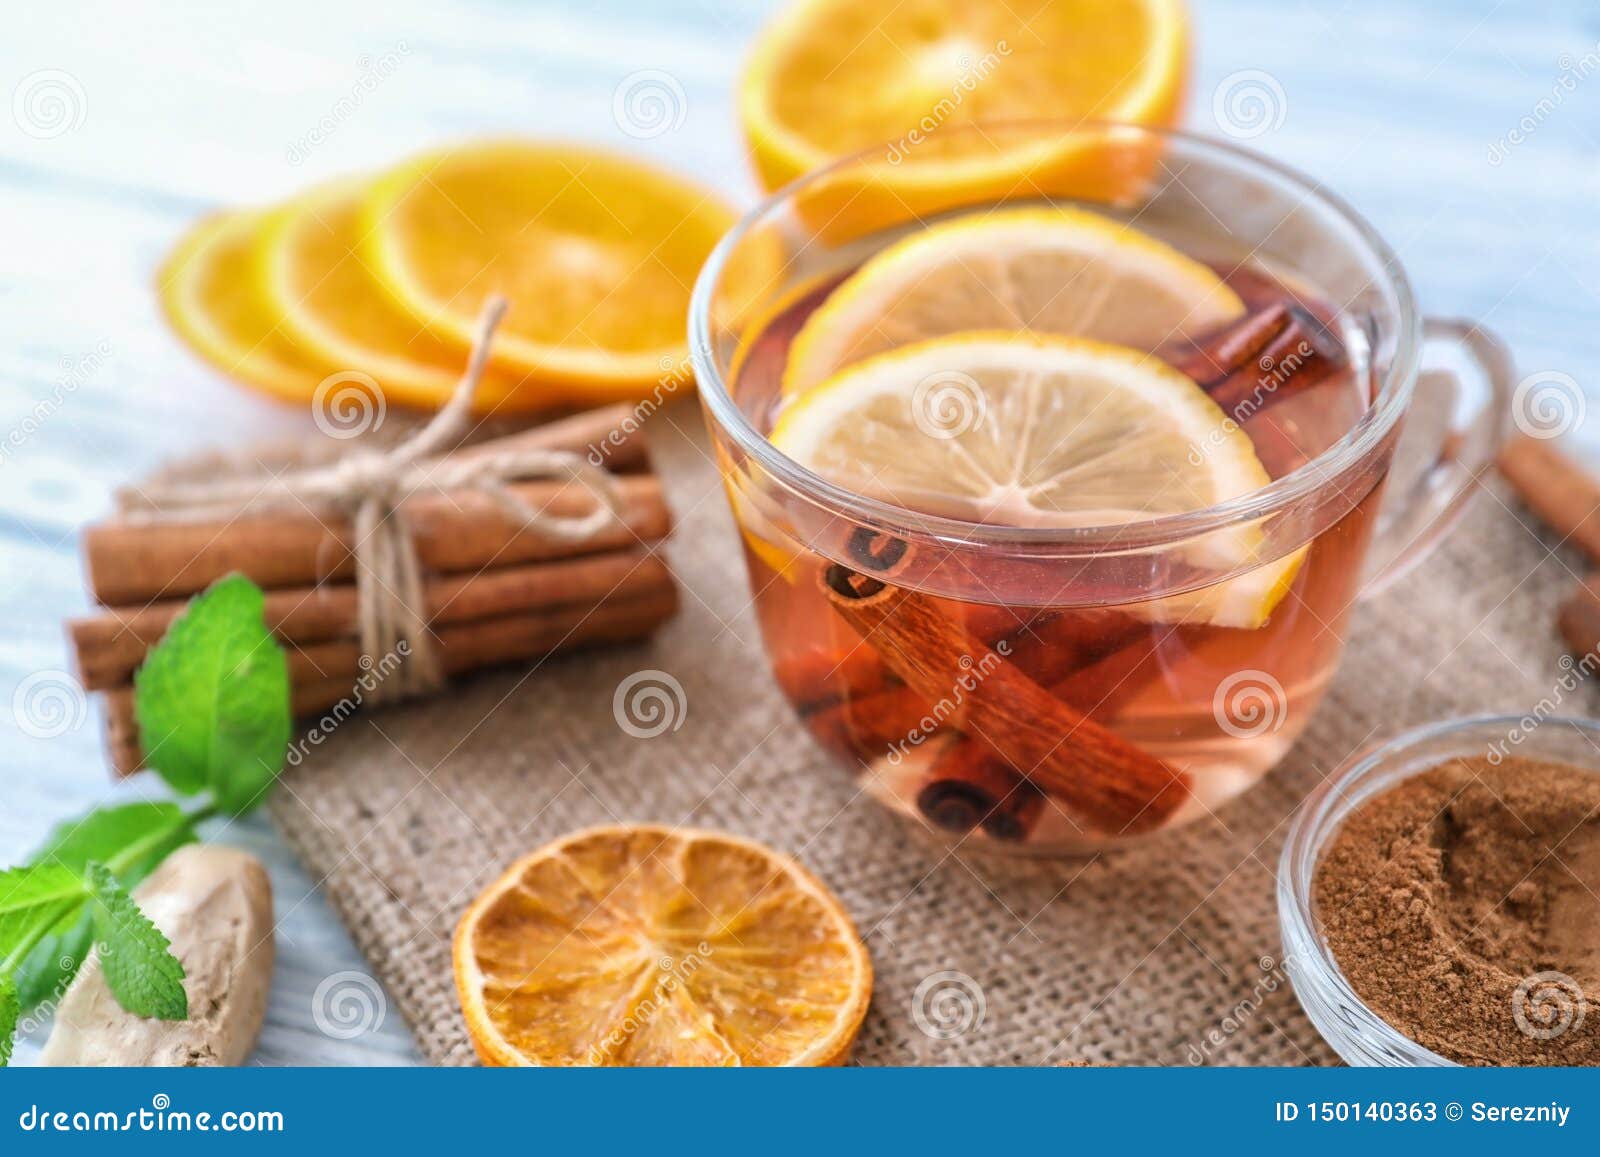 Cup of Hot Aromatic Beverage with Ingredients on Table Stock Image ...